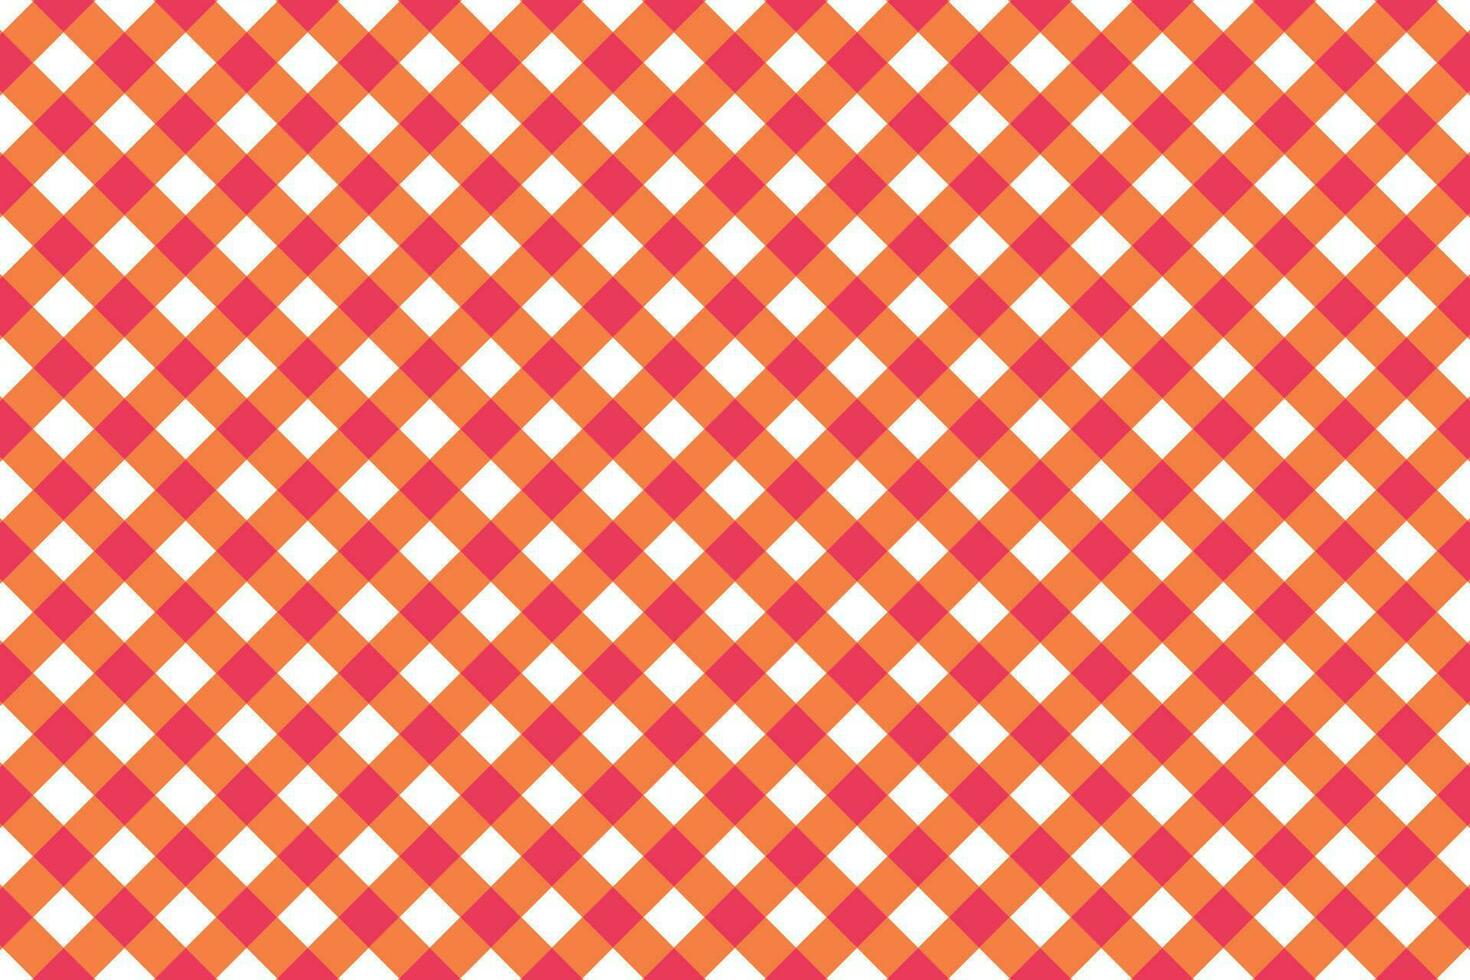 Gingham plaid fabric pattern. Texture background vector. vector